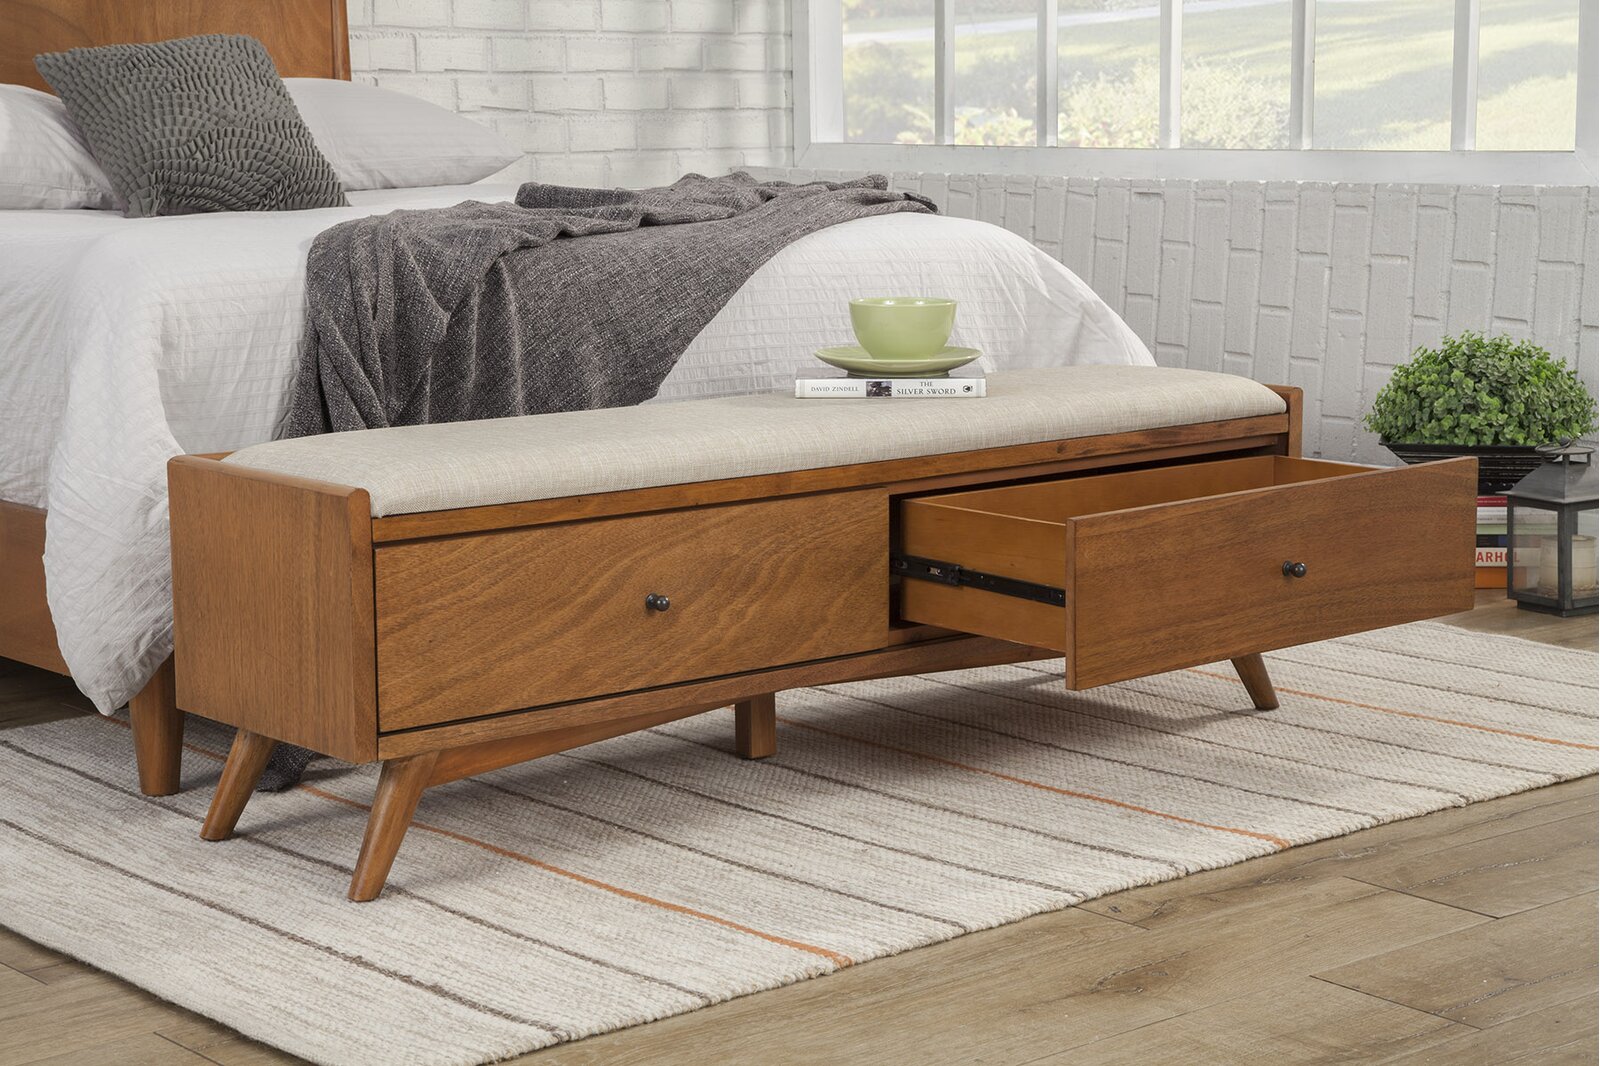 Bedroom Storage Bench: Combining Functionality And Style